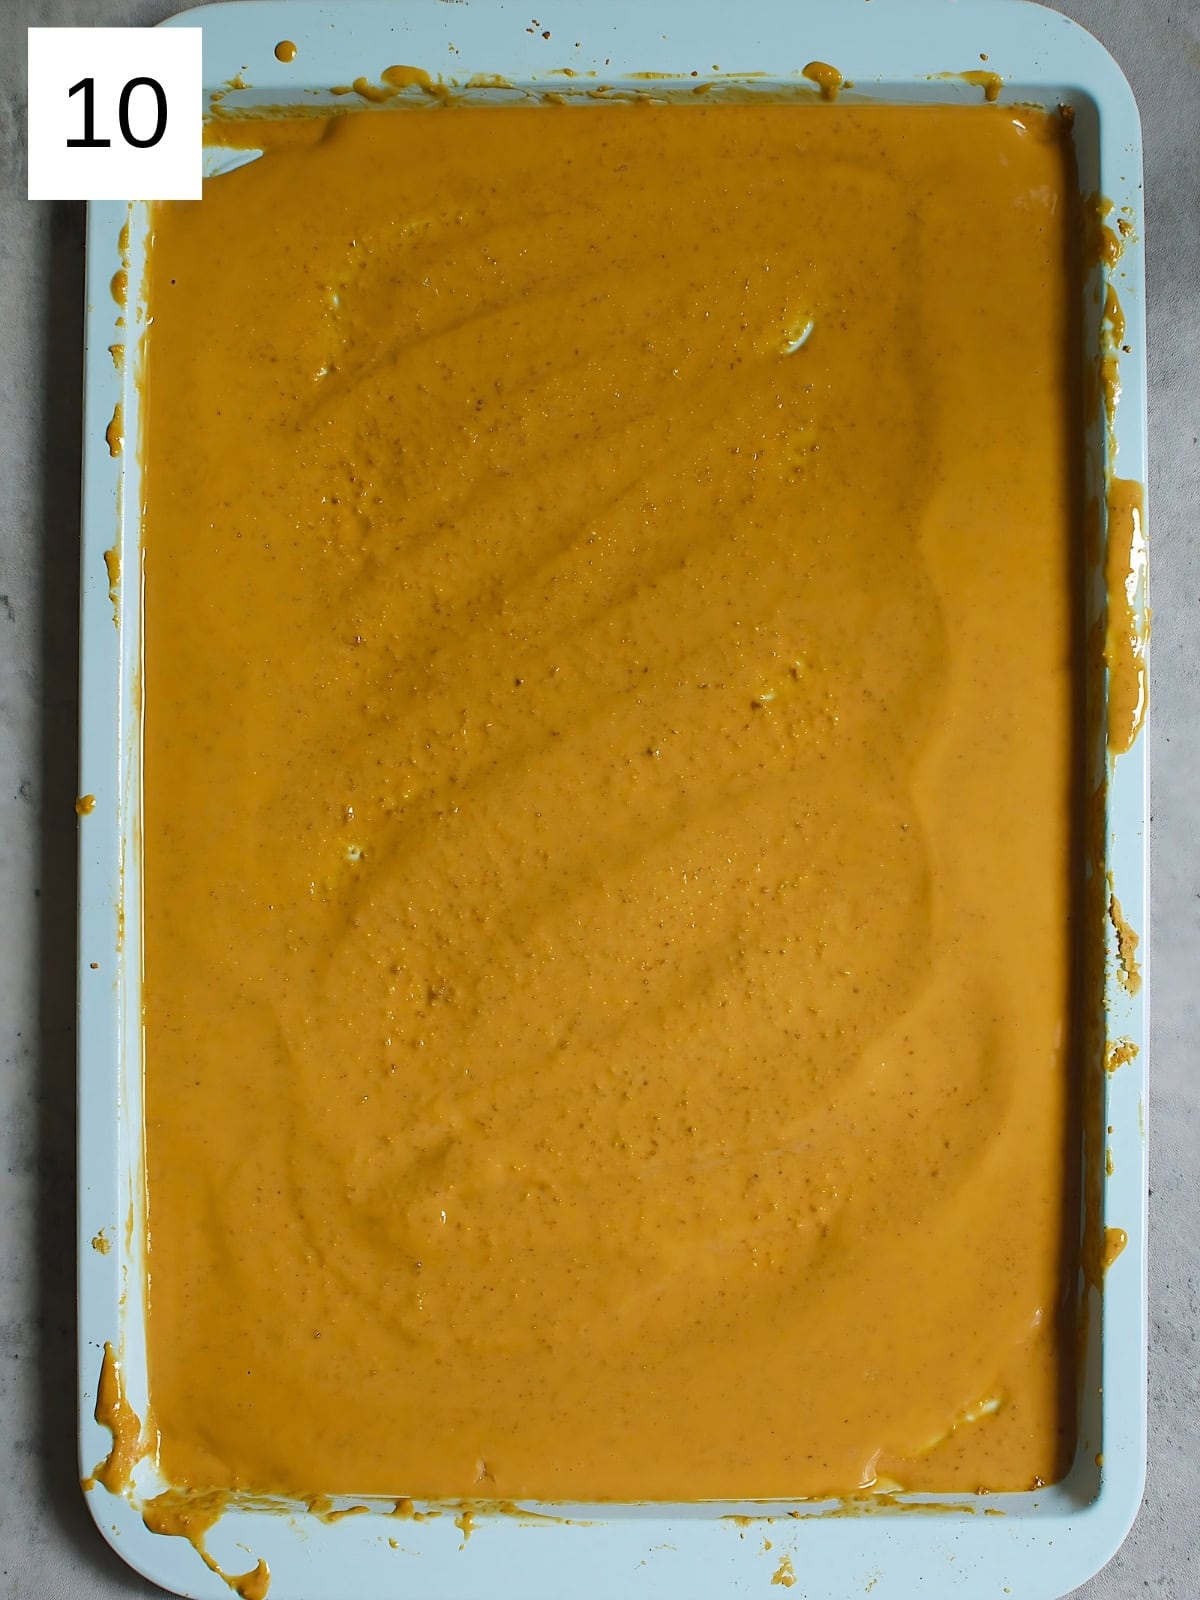 Brown colored melted white chocolate in a baking tray.